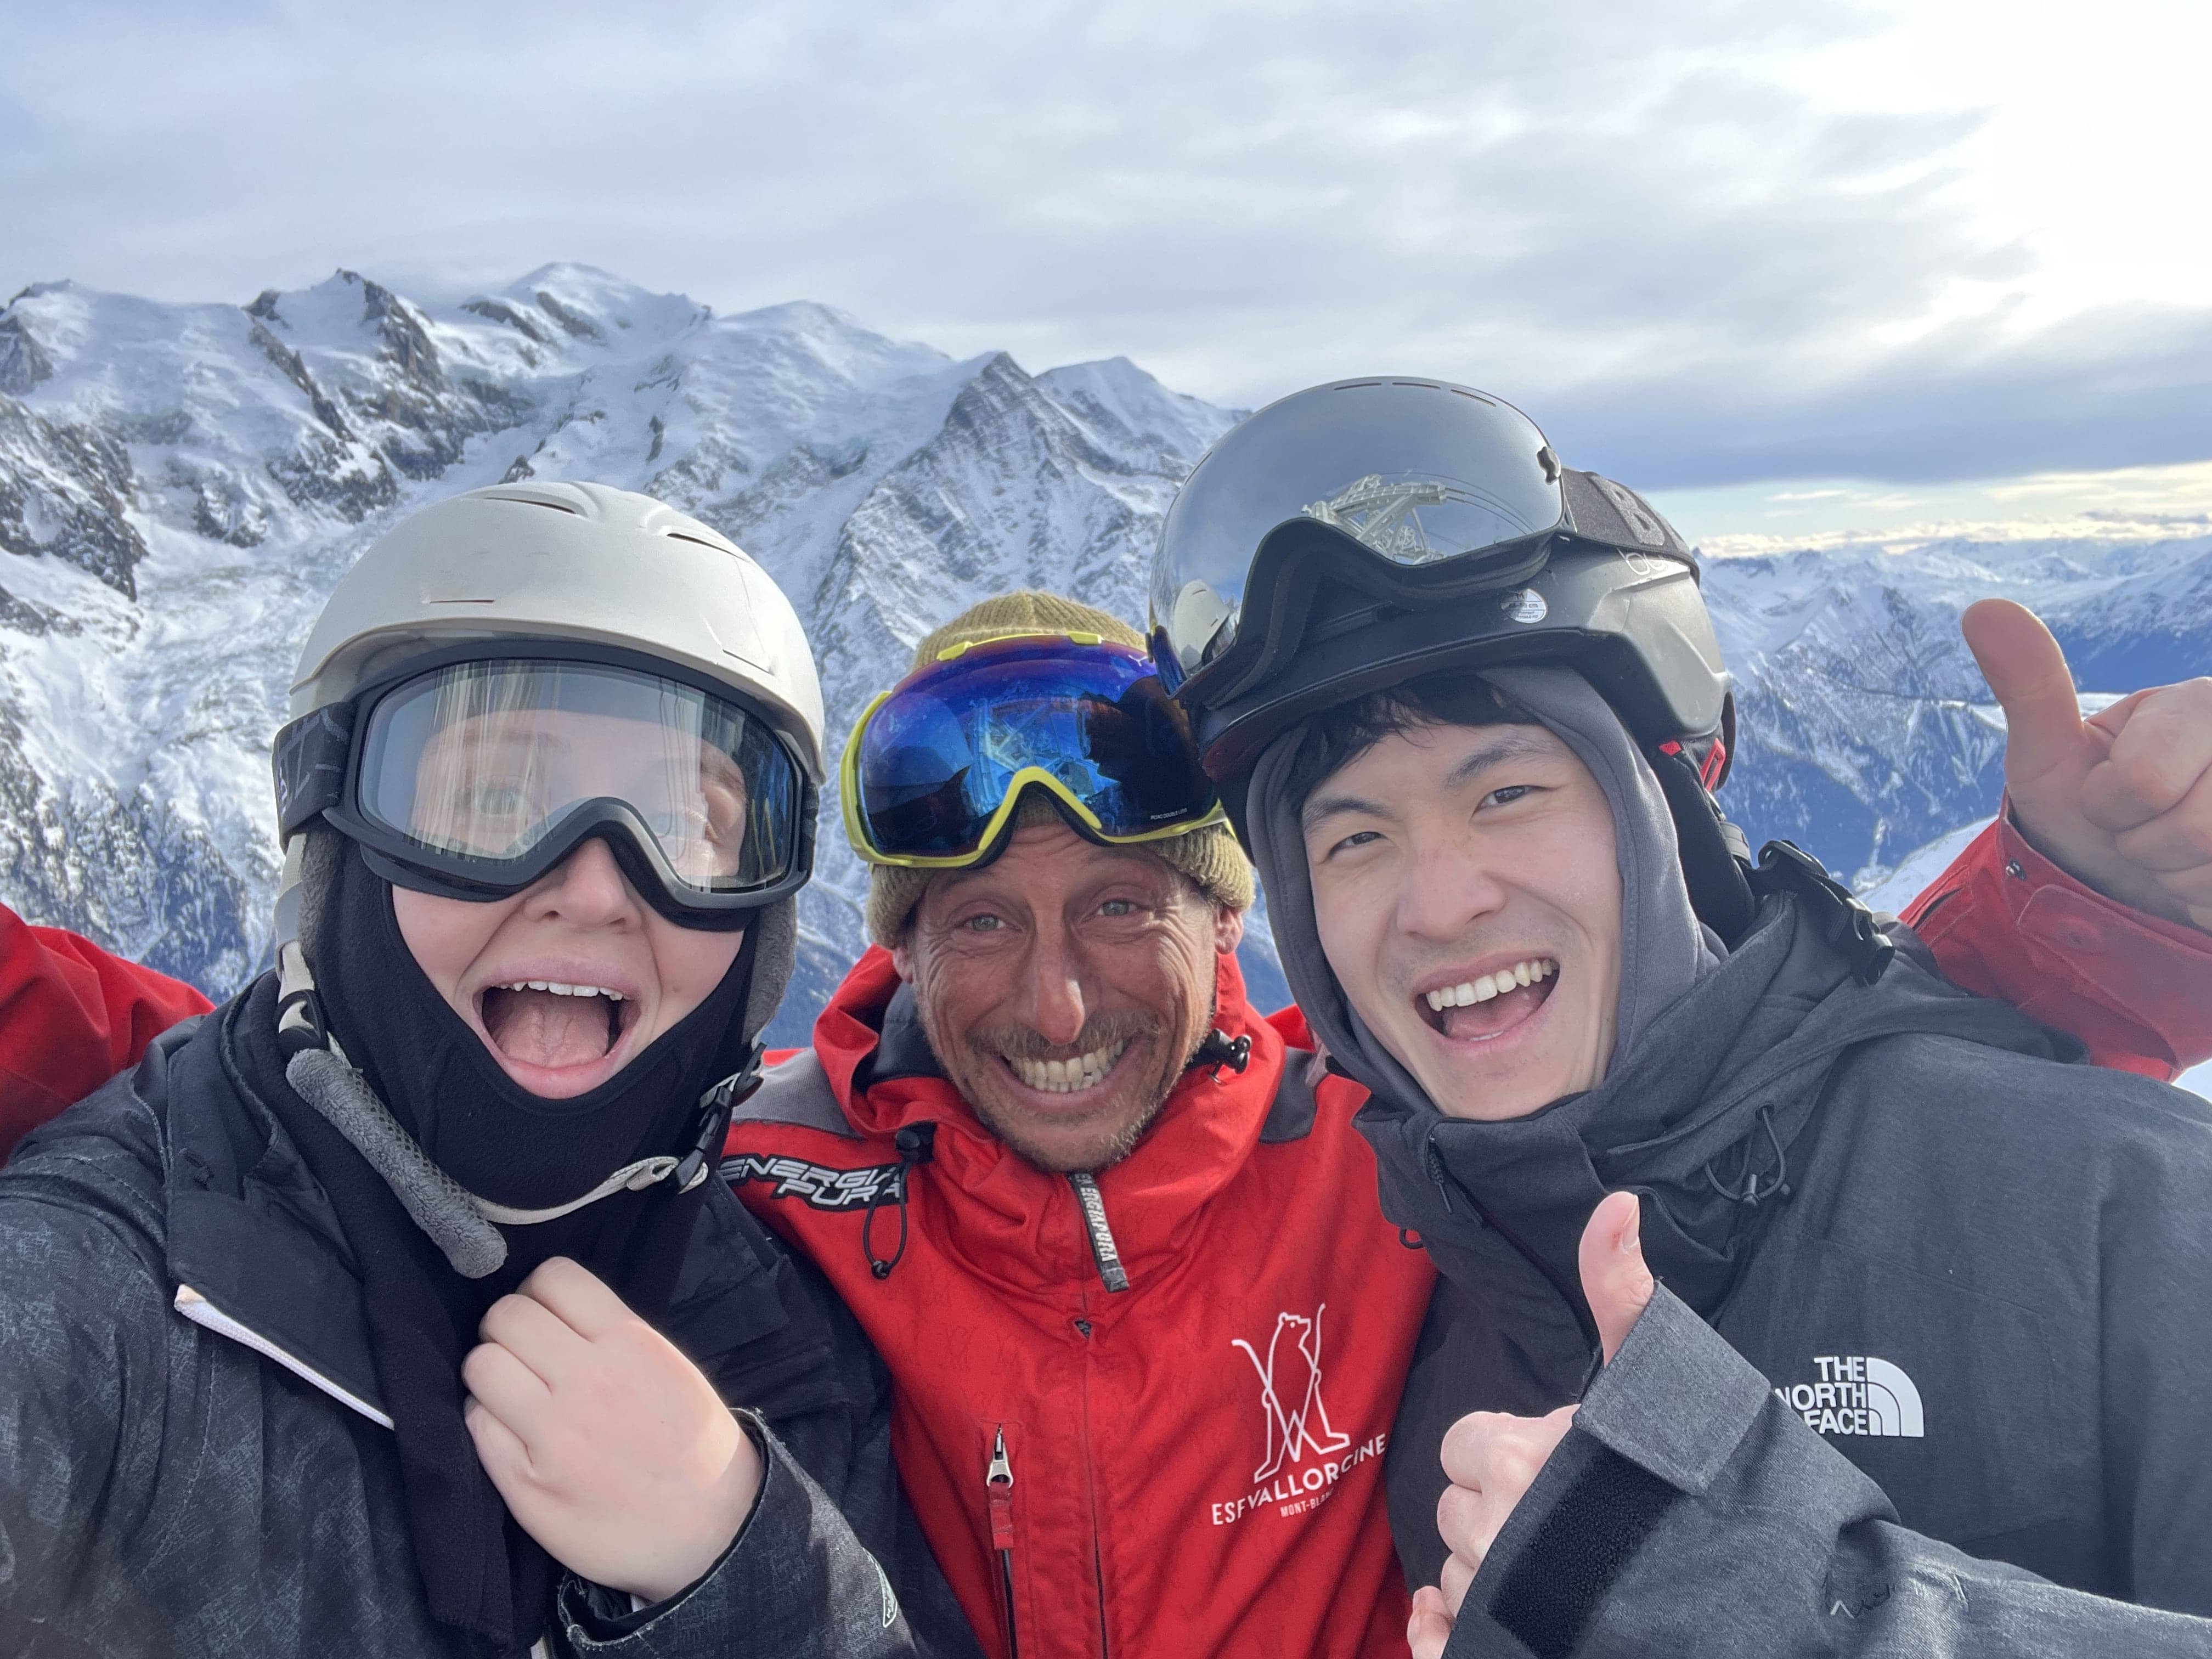 Two members of the MUI team and skiing instructor smiling with a mountain vista in the background.